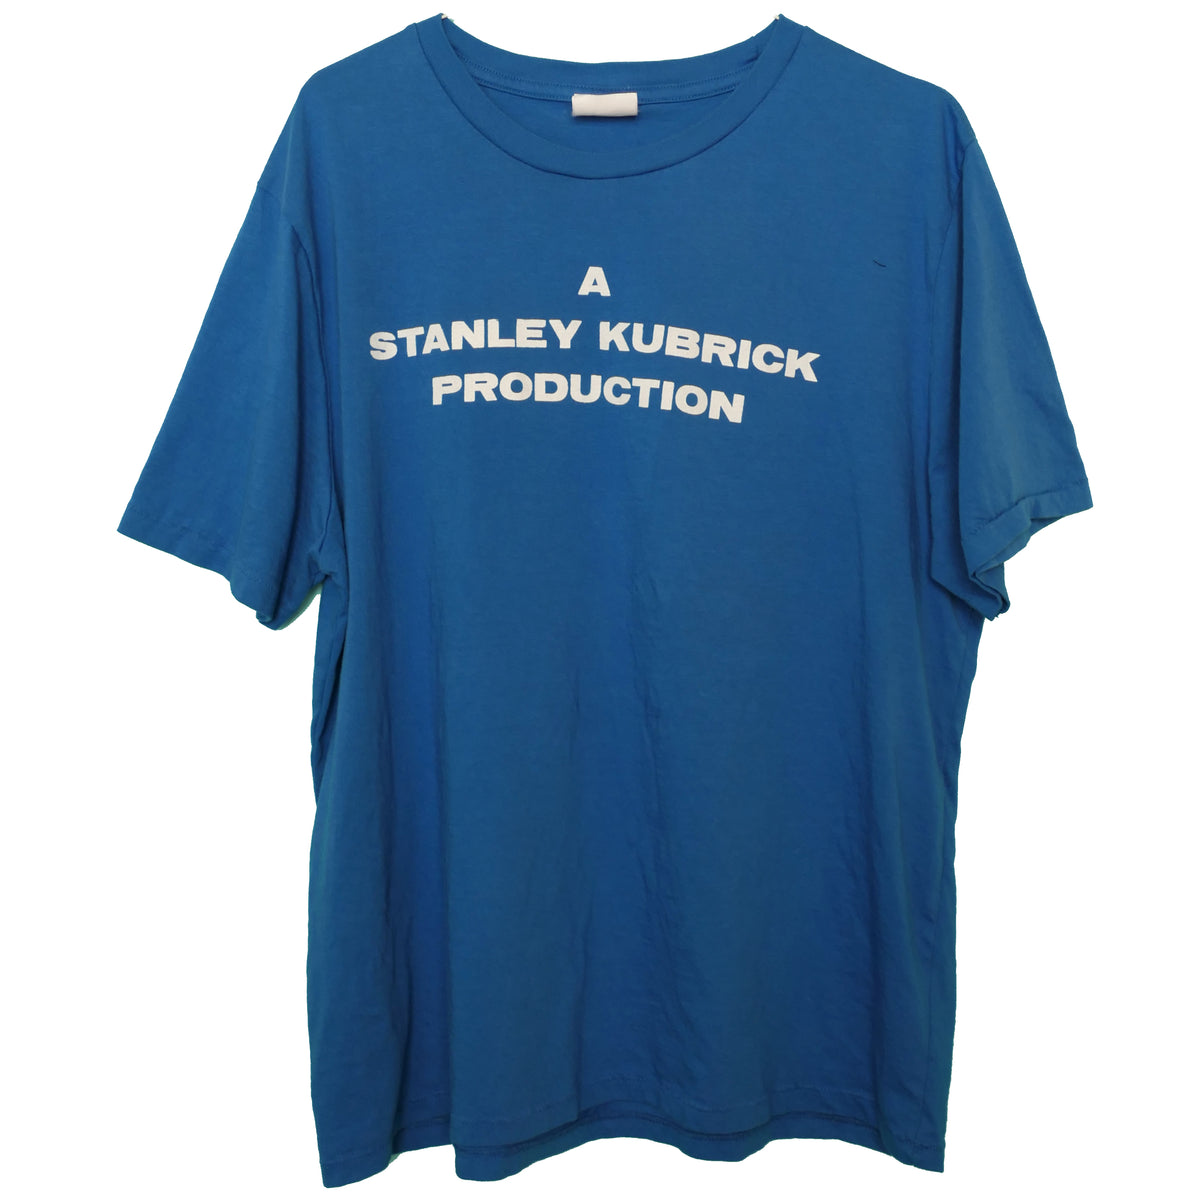 A Stanley Kubrick Production Tee